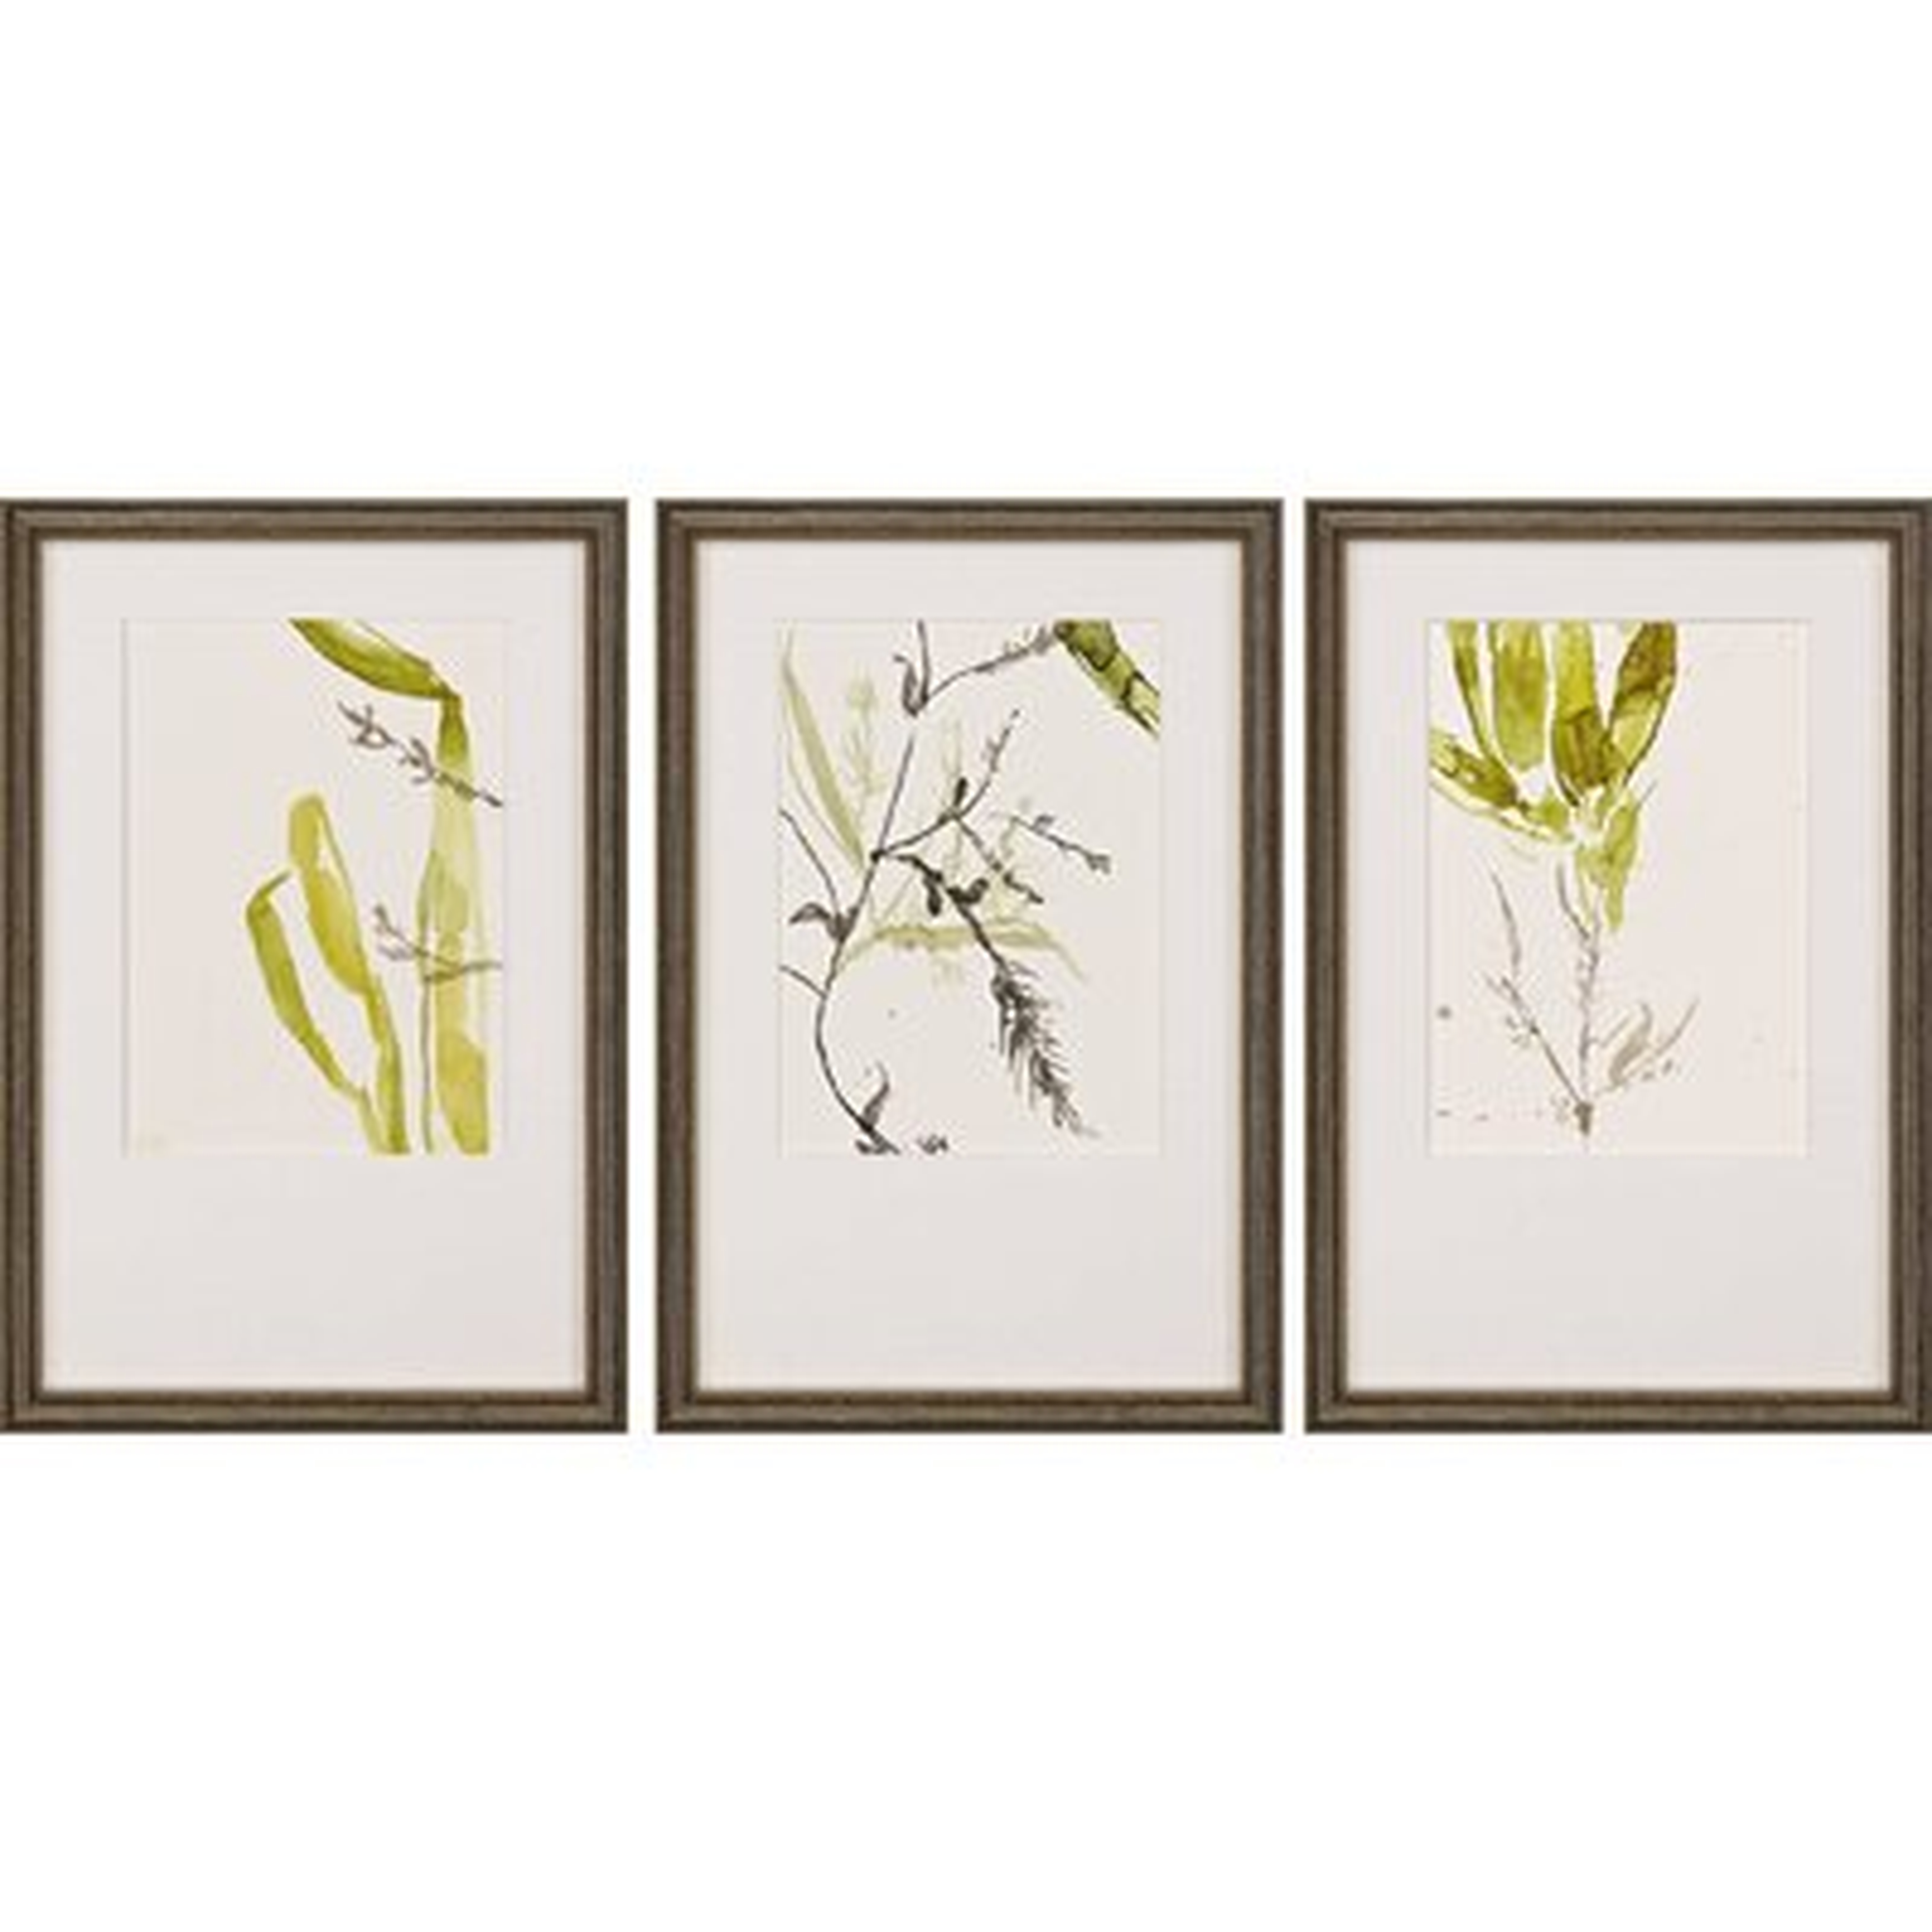 'Sea Forest II S/3' by Goldberger - 3 Piece Picture Frame Print Set on Paper - Wayfair